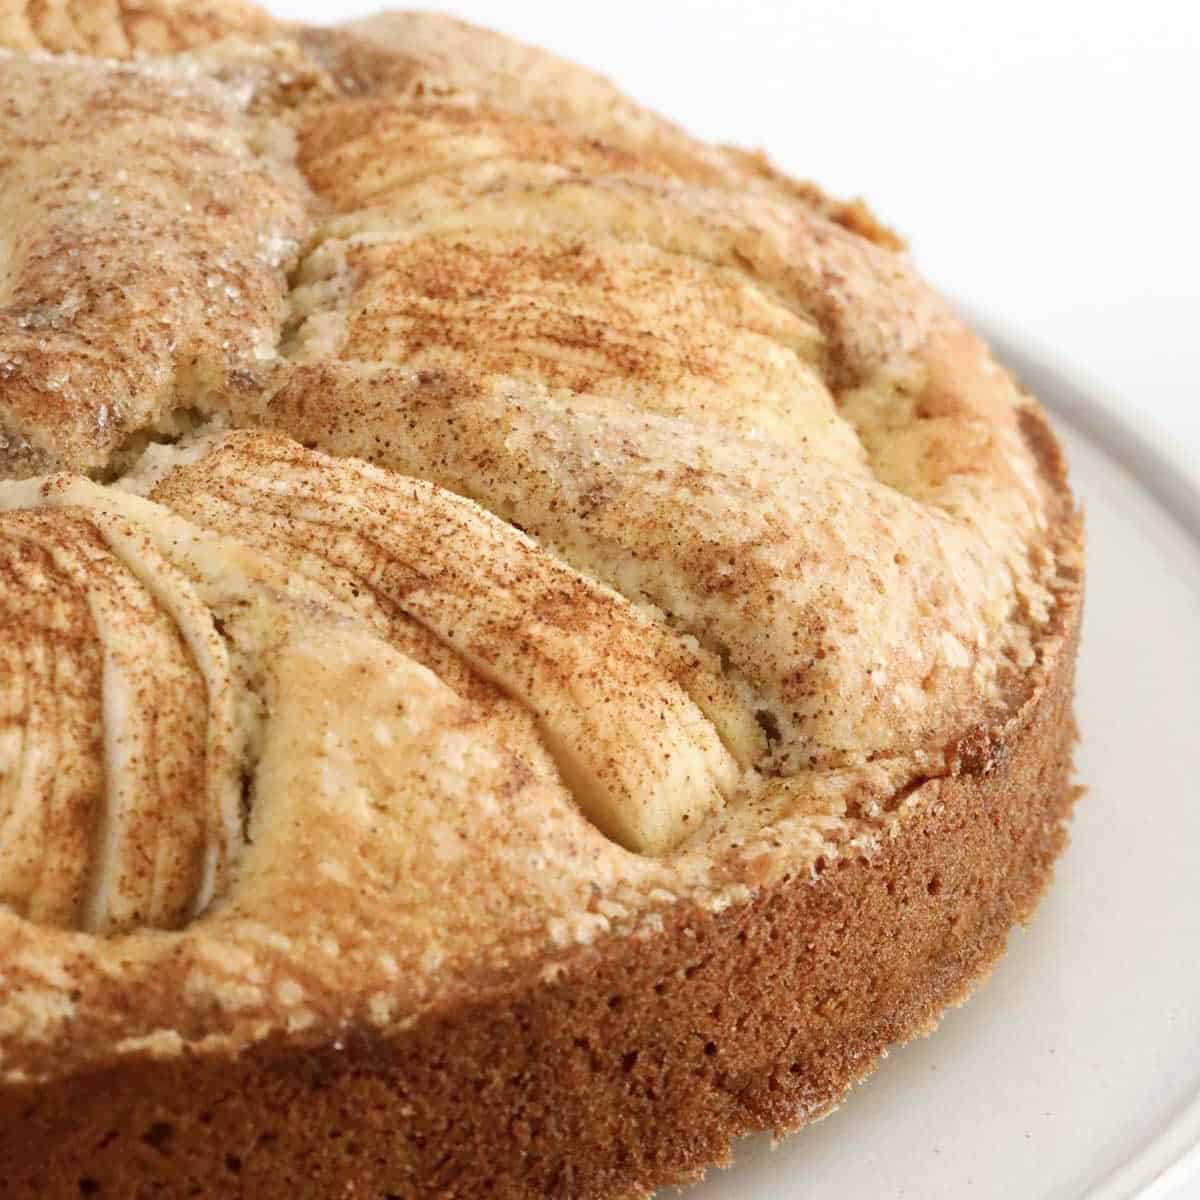 Apples and cinnamon on top of a round cake.